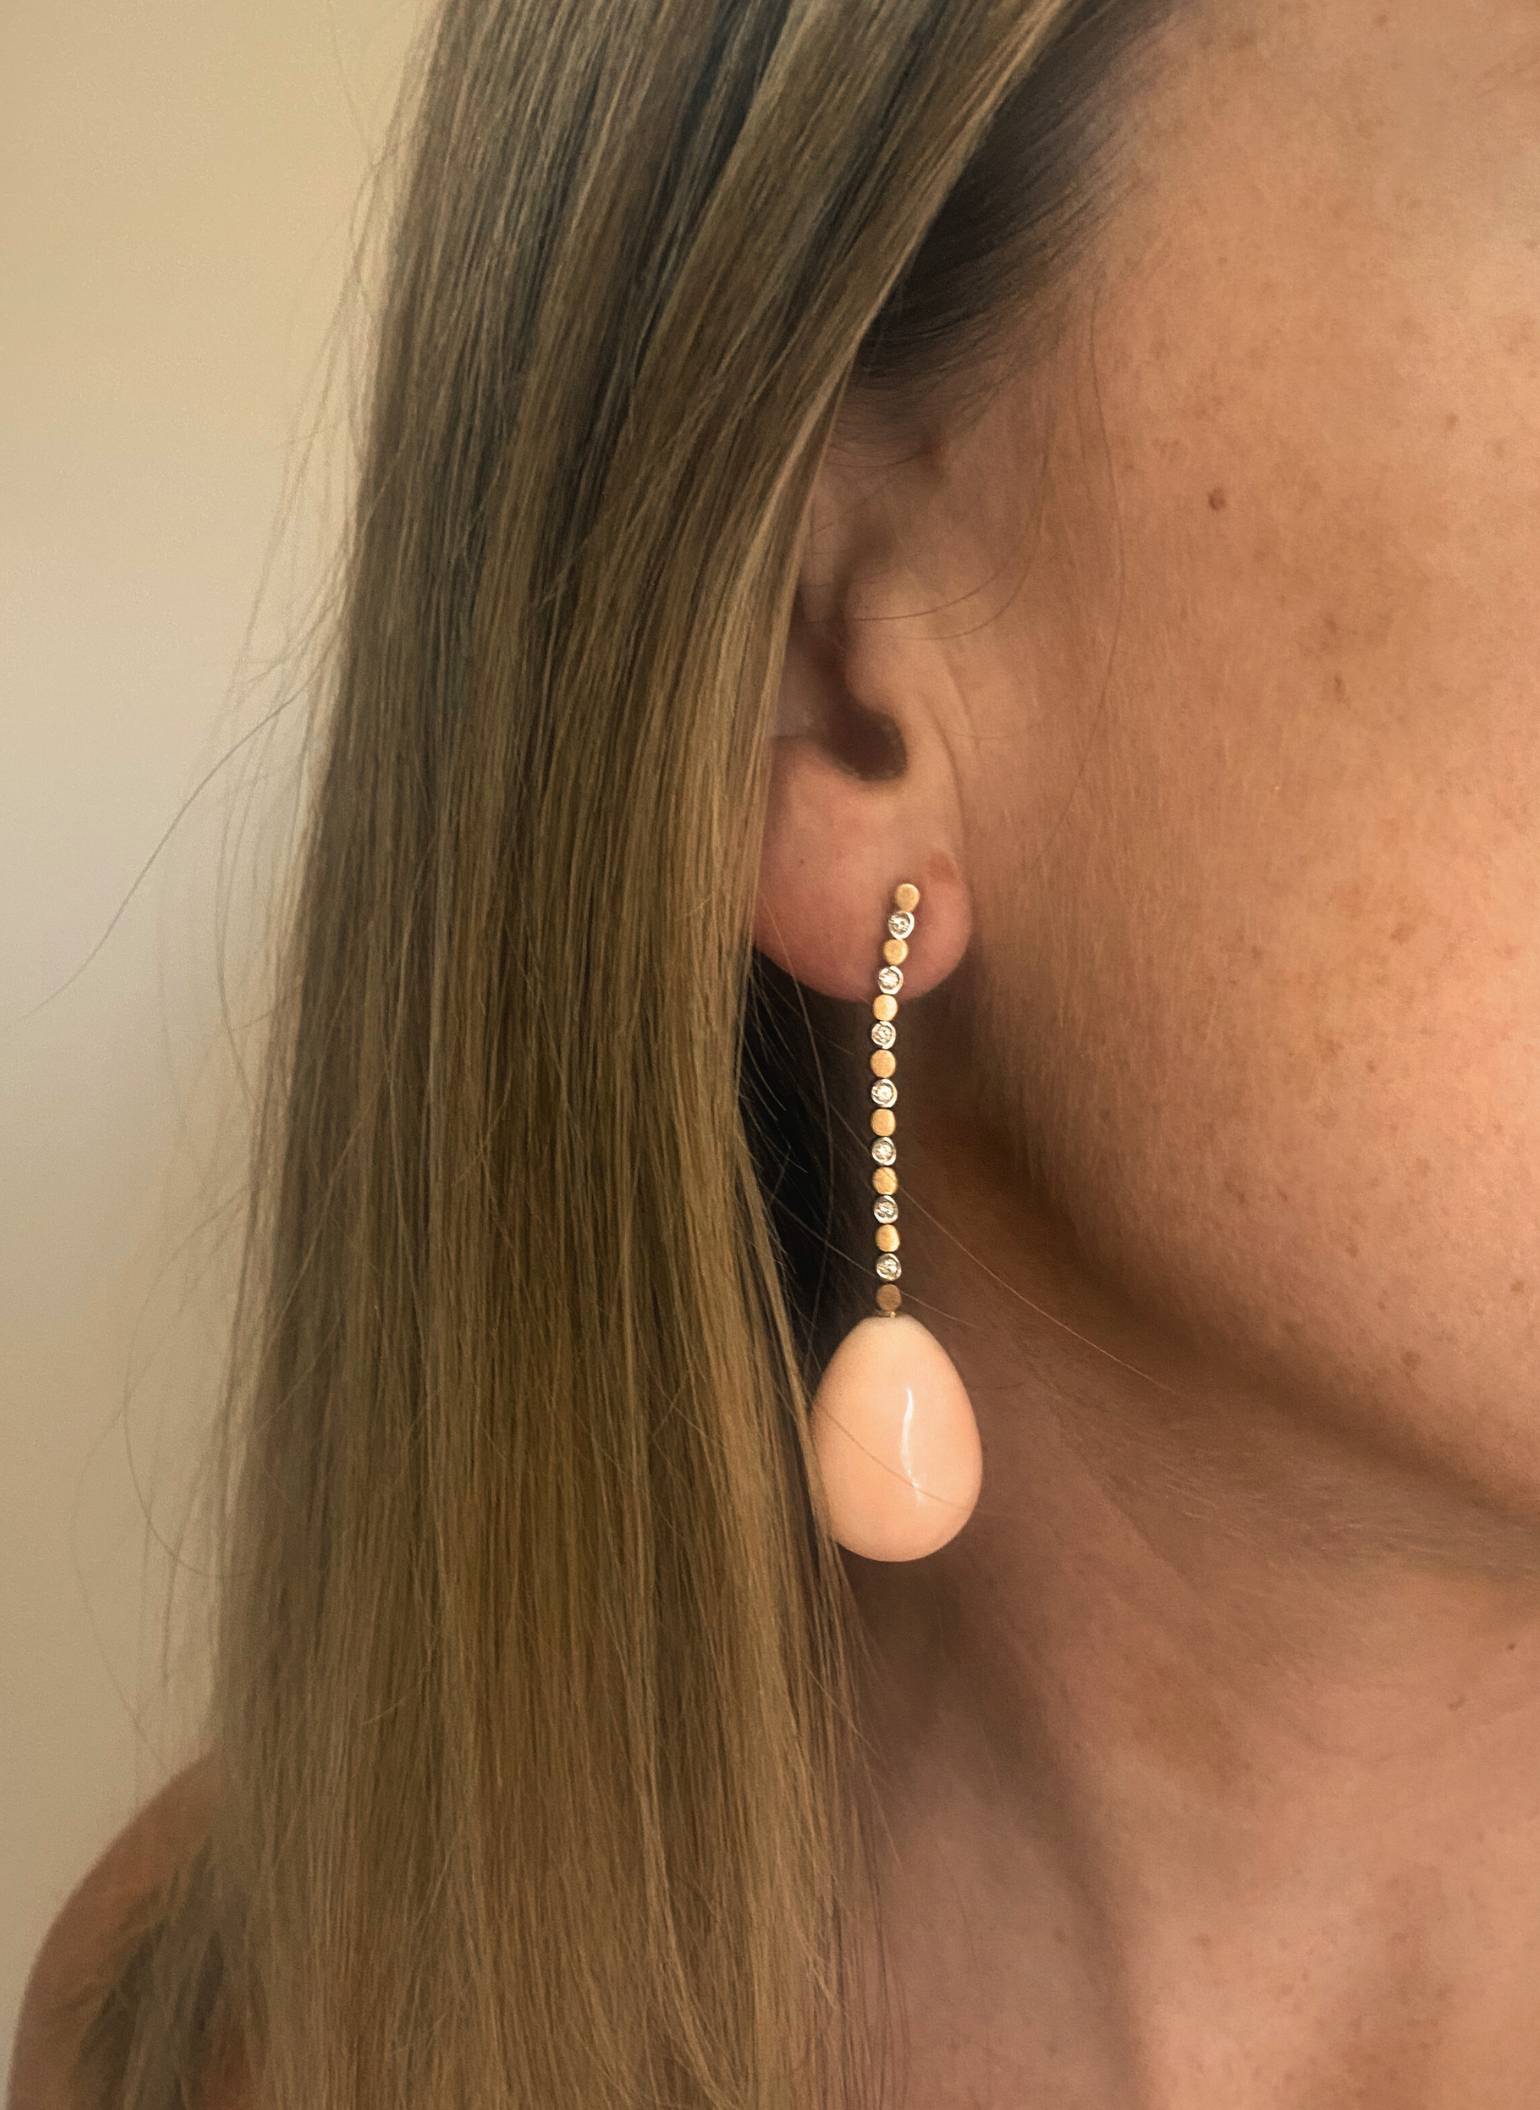 Coral and Brilliant Tribute Earrings